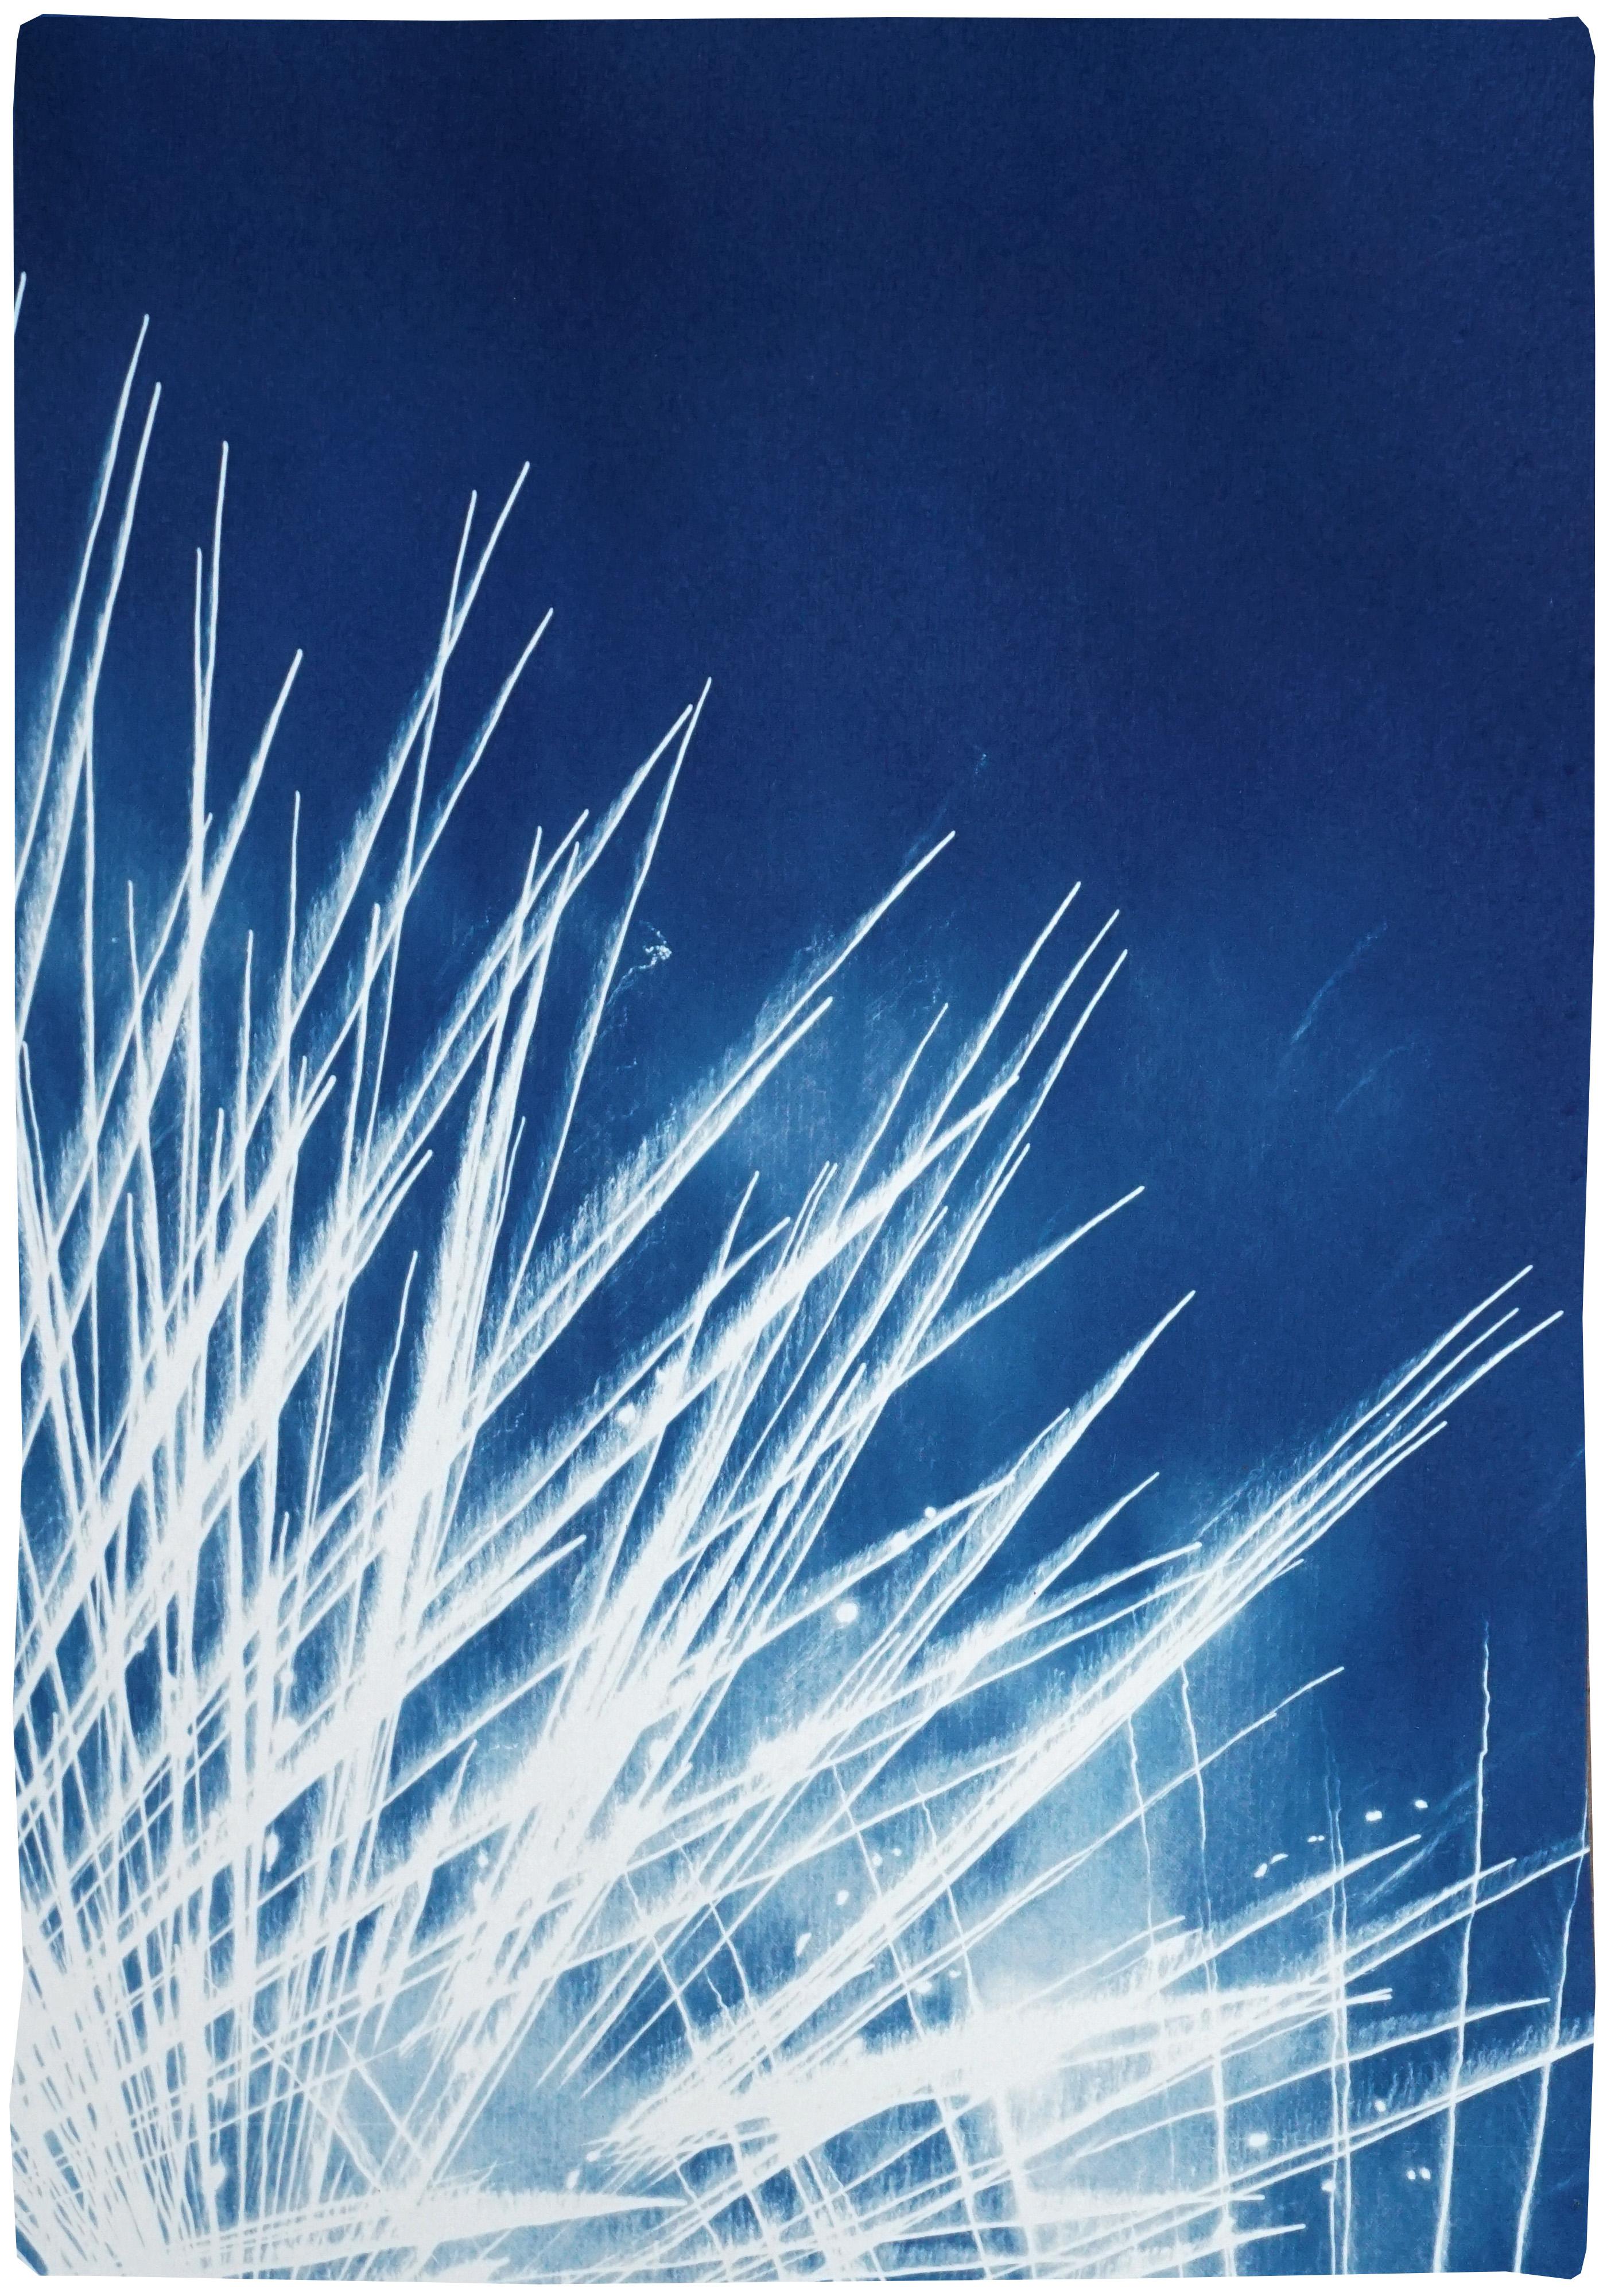 Nighttime Fireworks Flaring, Nocturnal Skyline, Abstract Lights in White & Blue